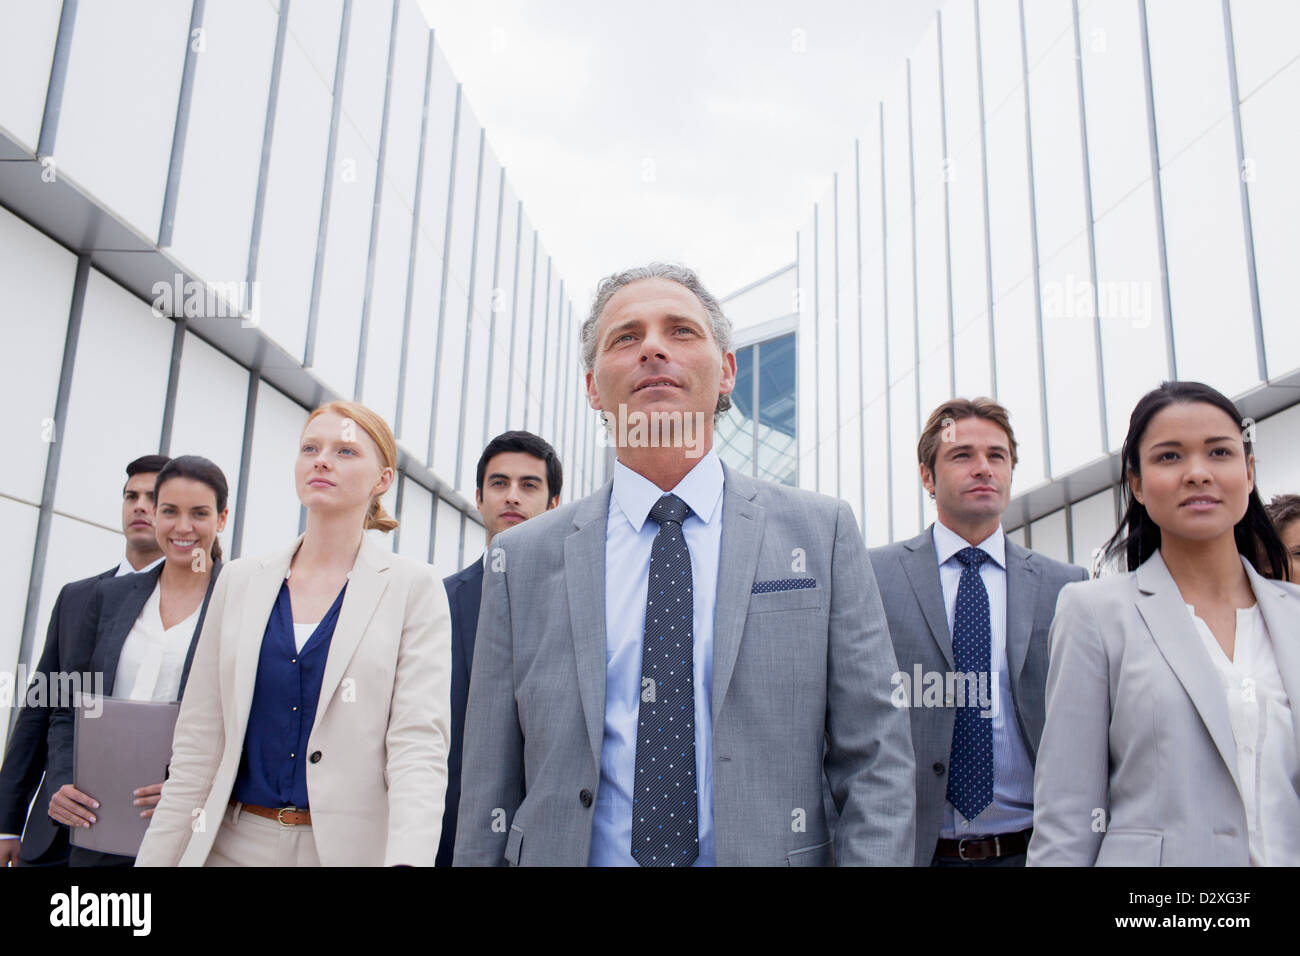 Confident business people looking ahead Stock Photo